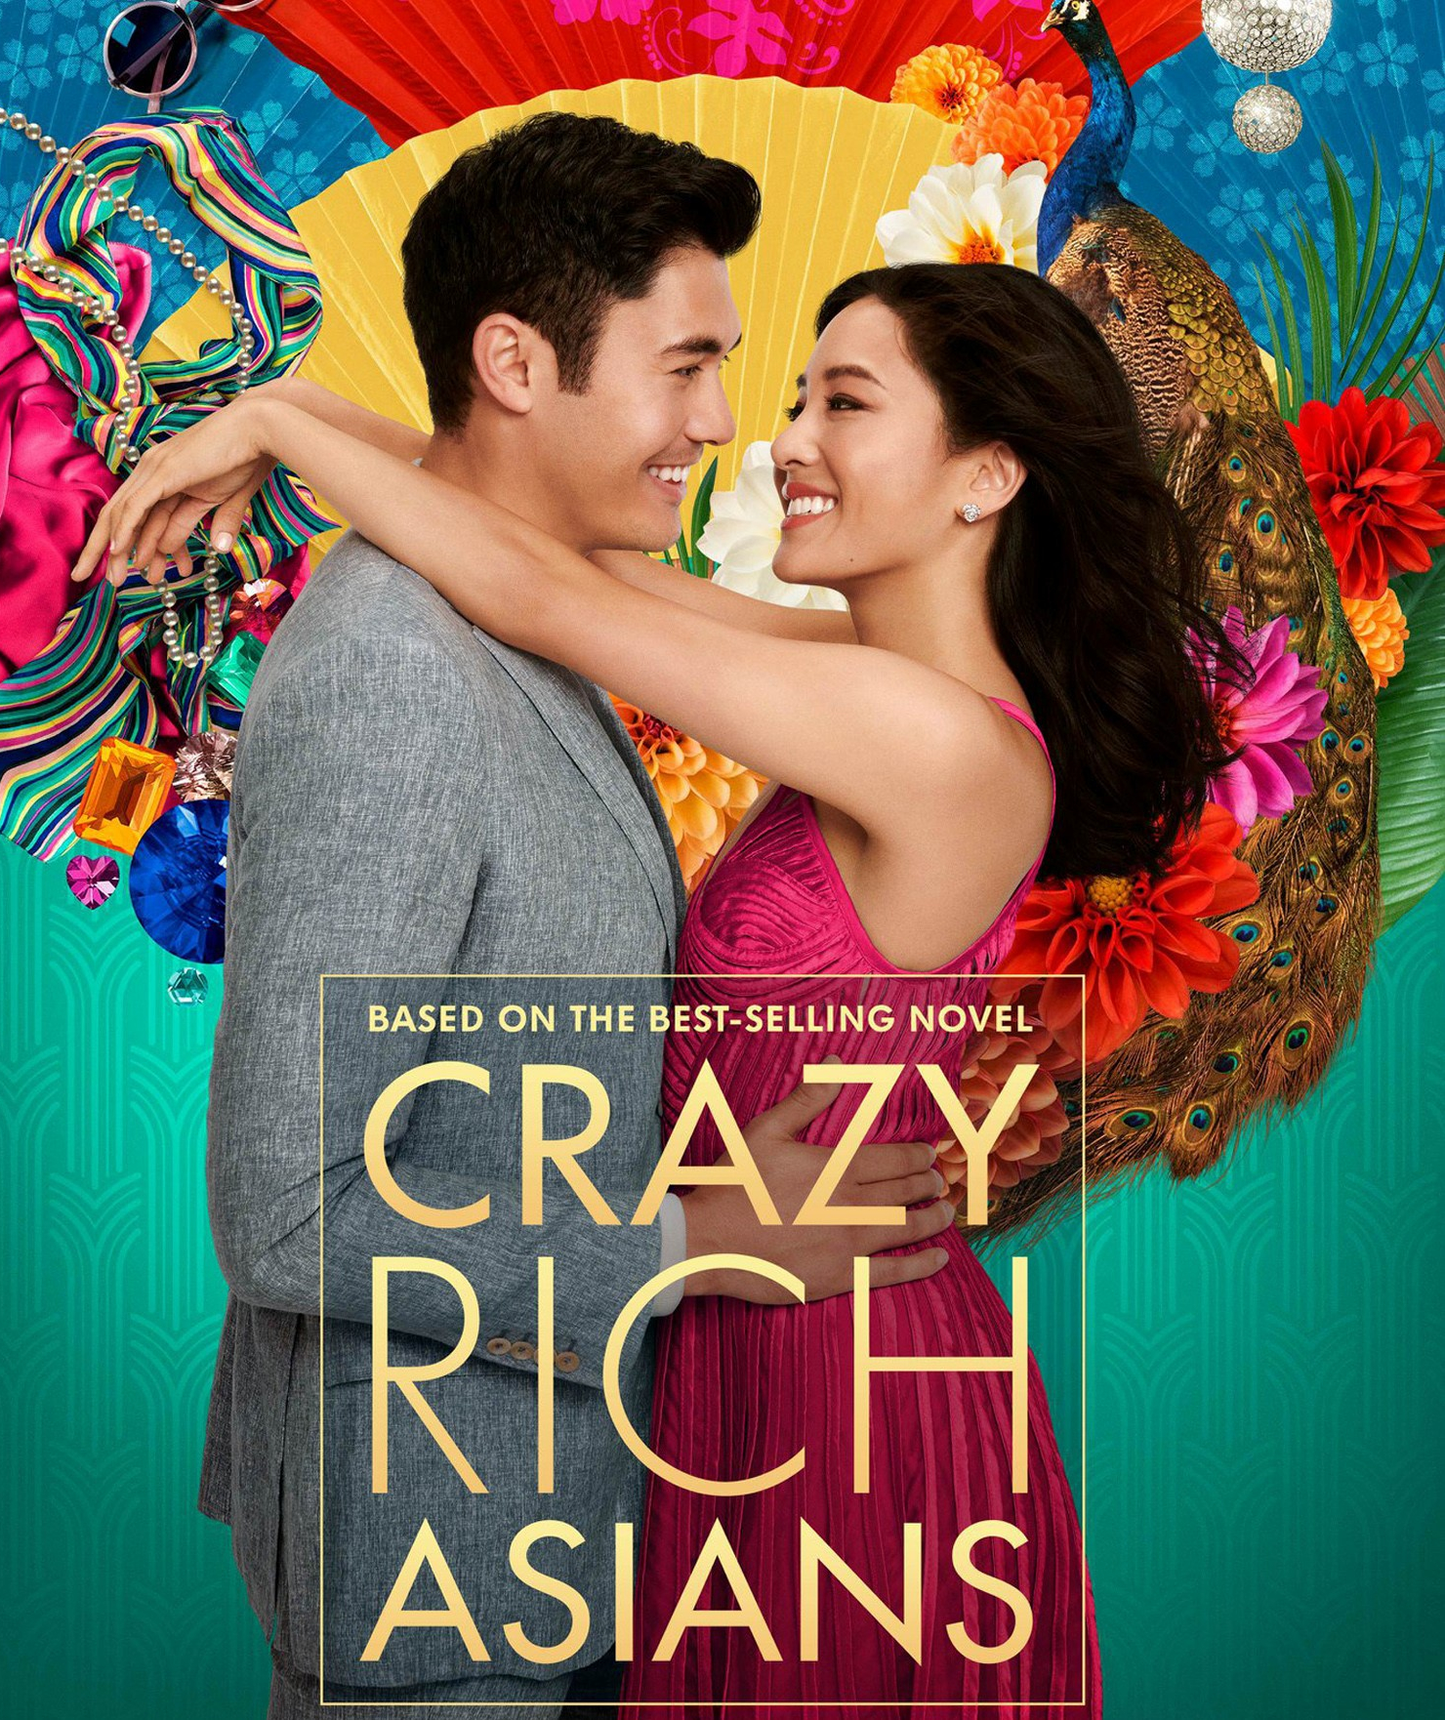 Crazy Rich Asians - Blu-ray Comedy 2018 PG-13